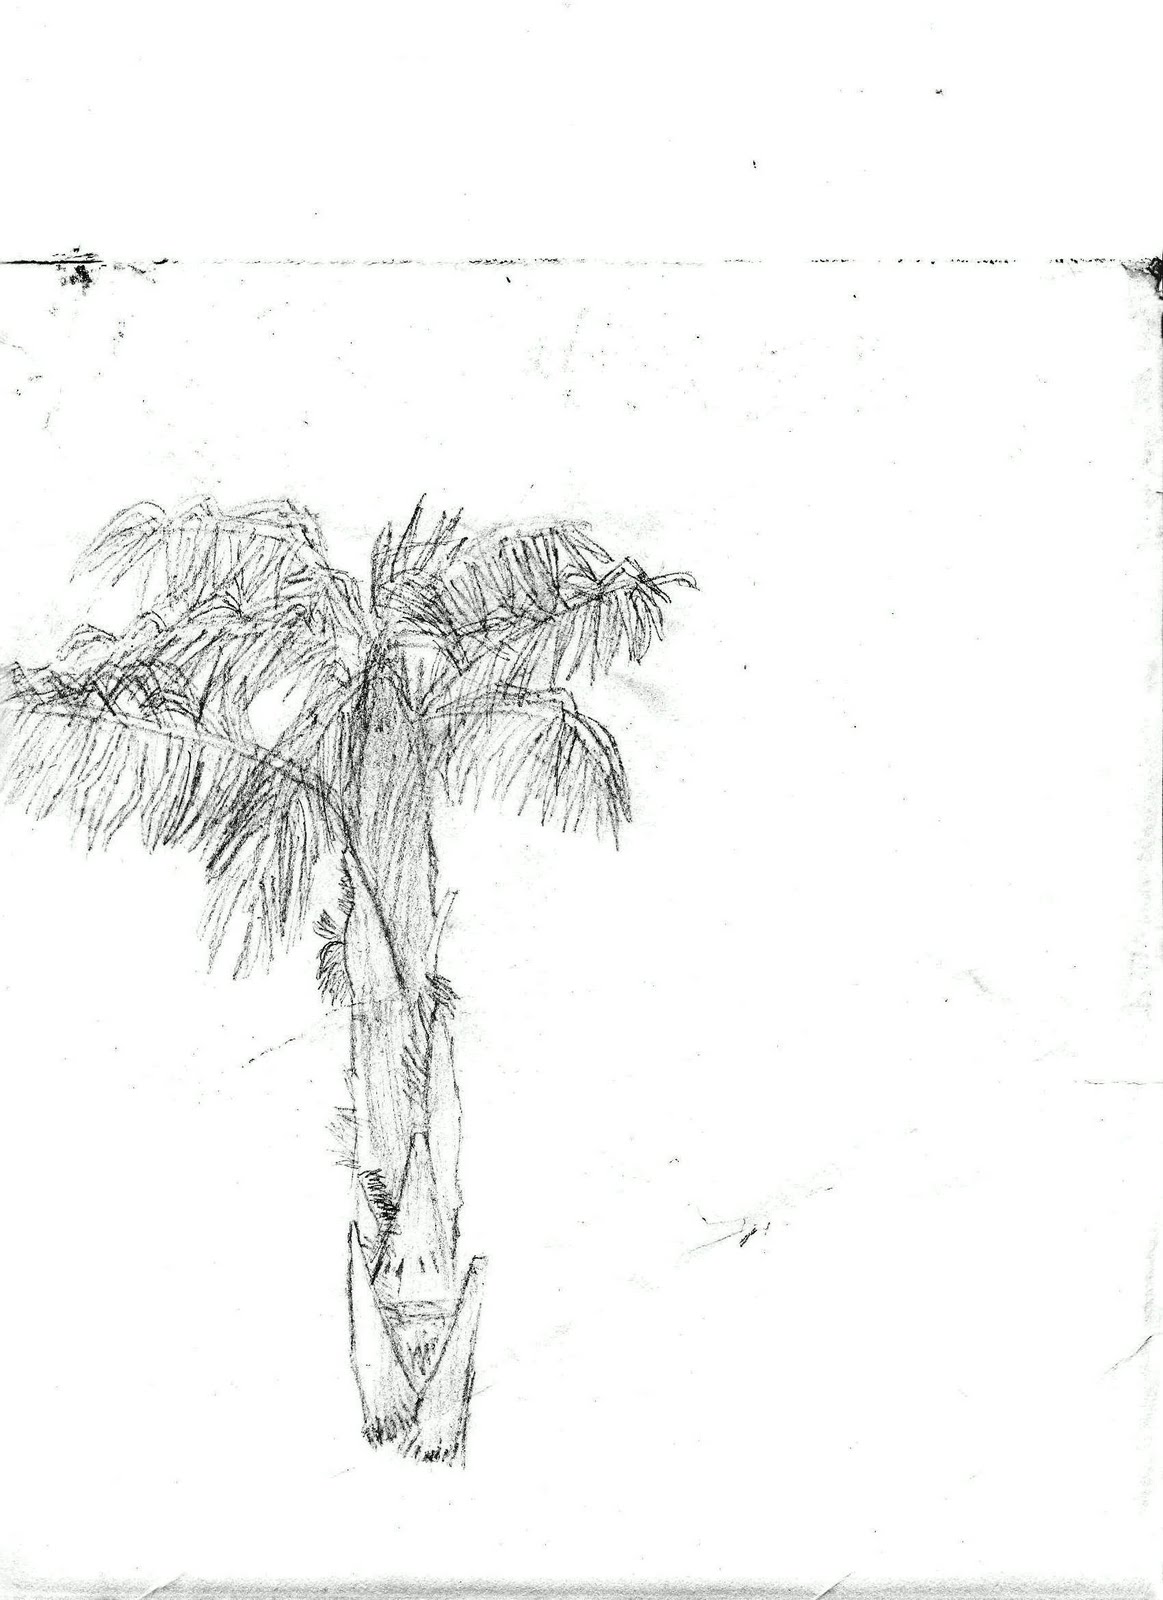 My pic of a palm tree.